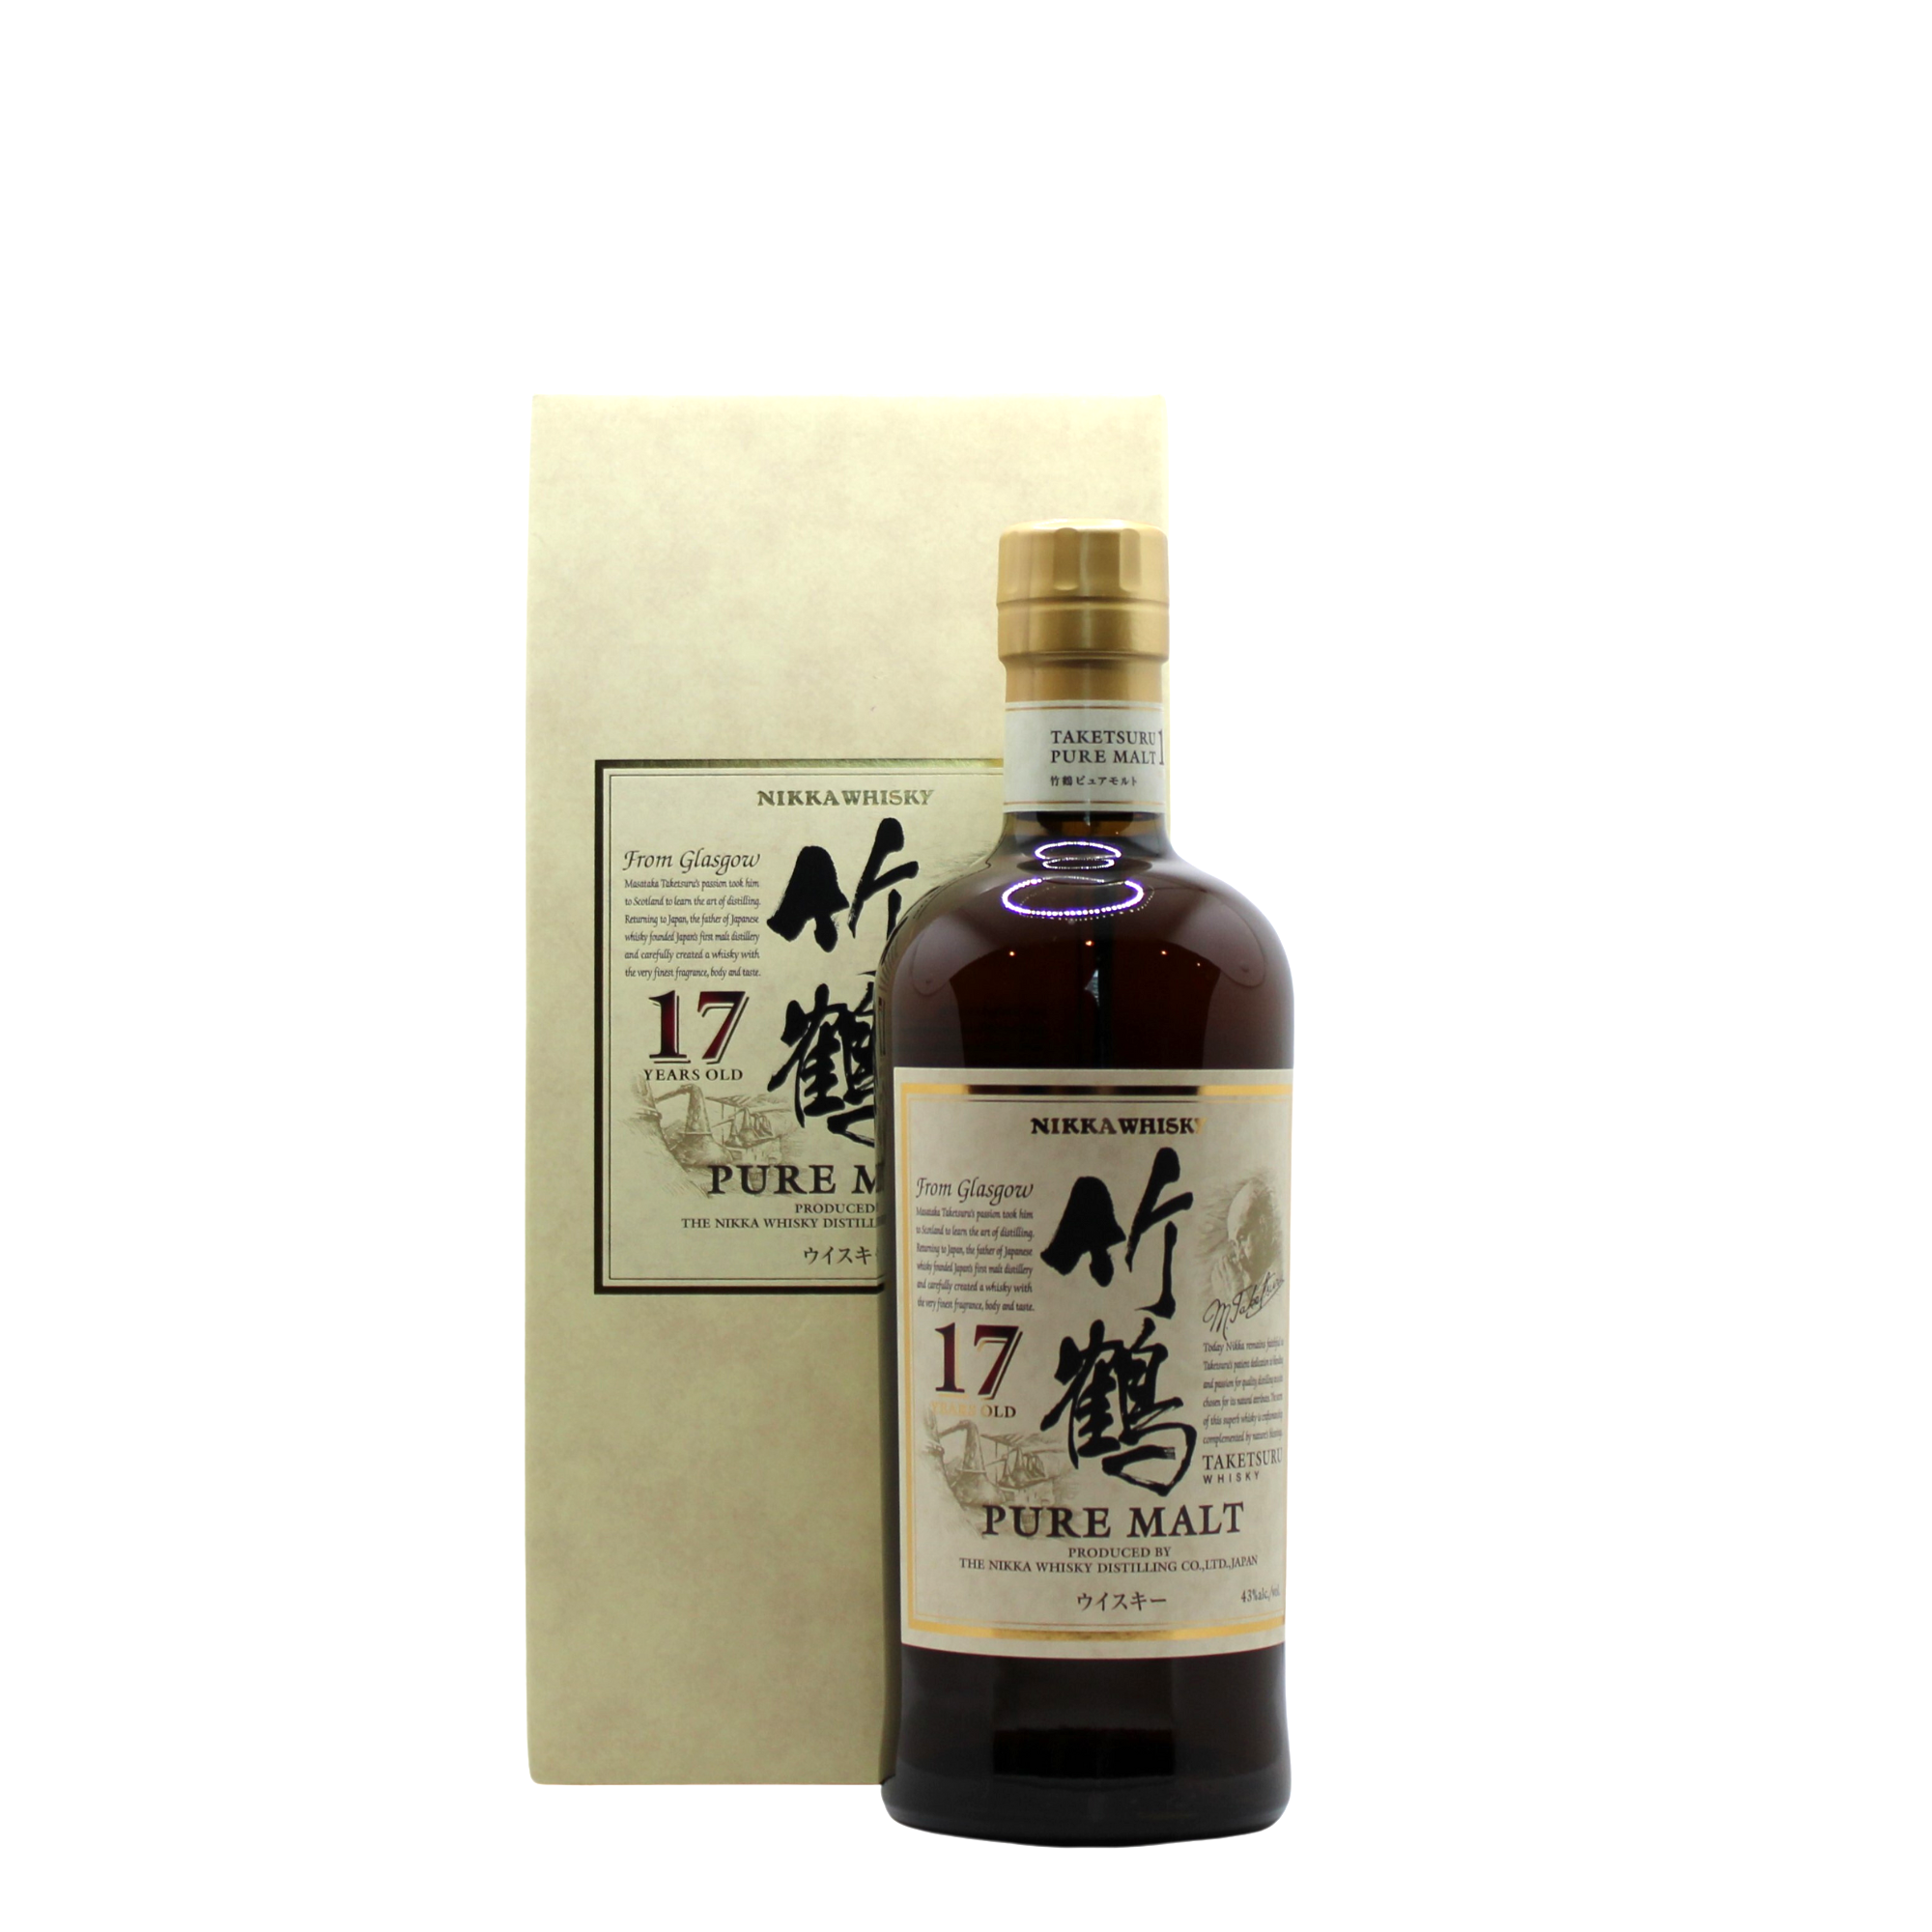 An excellently balanced whisky made by Nikka by vatting malts from Yoichi & Miyagikyo distilleries. Sadly discontinued along with other aged products under the same umbrella of Nikka's founder Masataka Taketsuru. Multiple category award winner in World Whiskies Awards over the years.